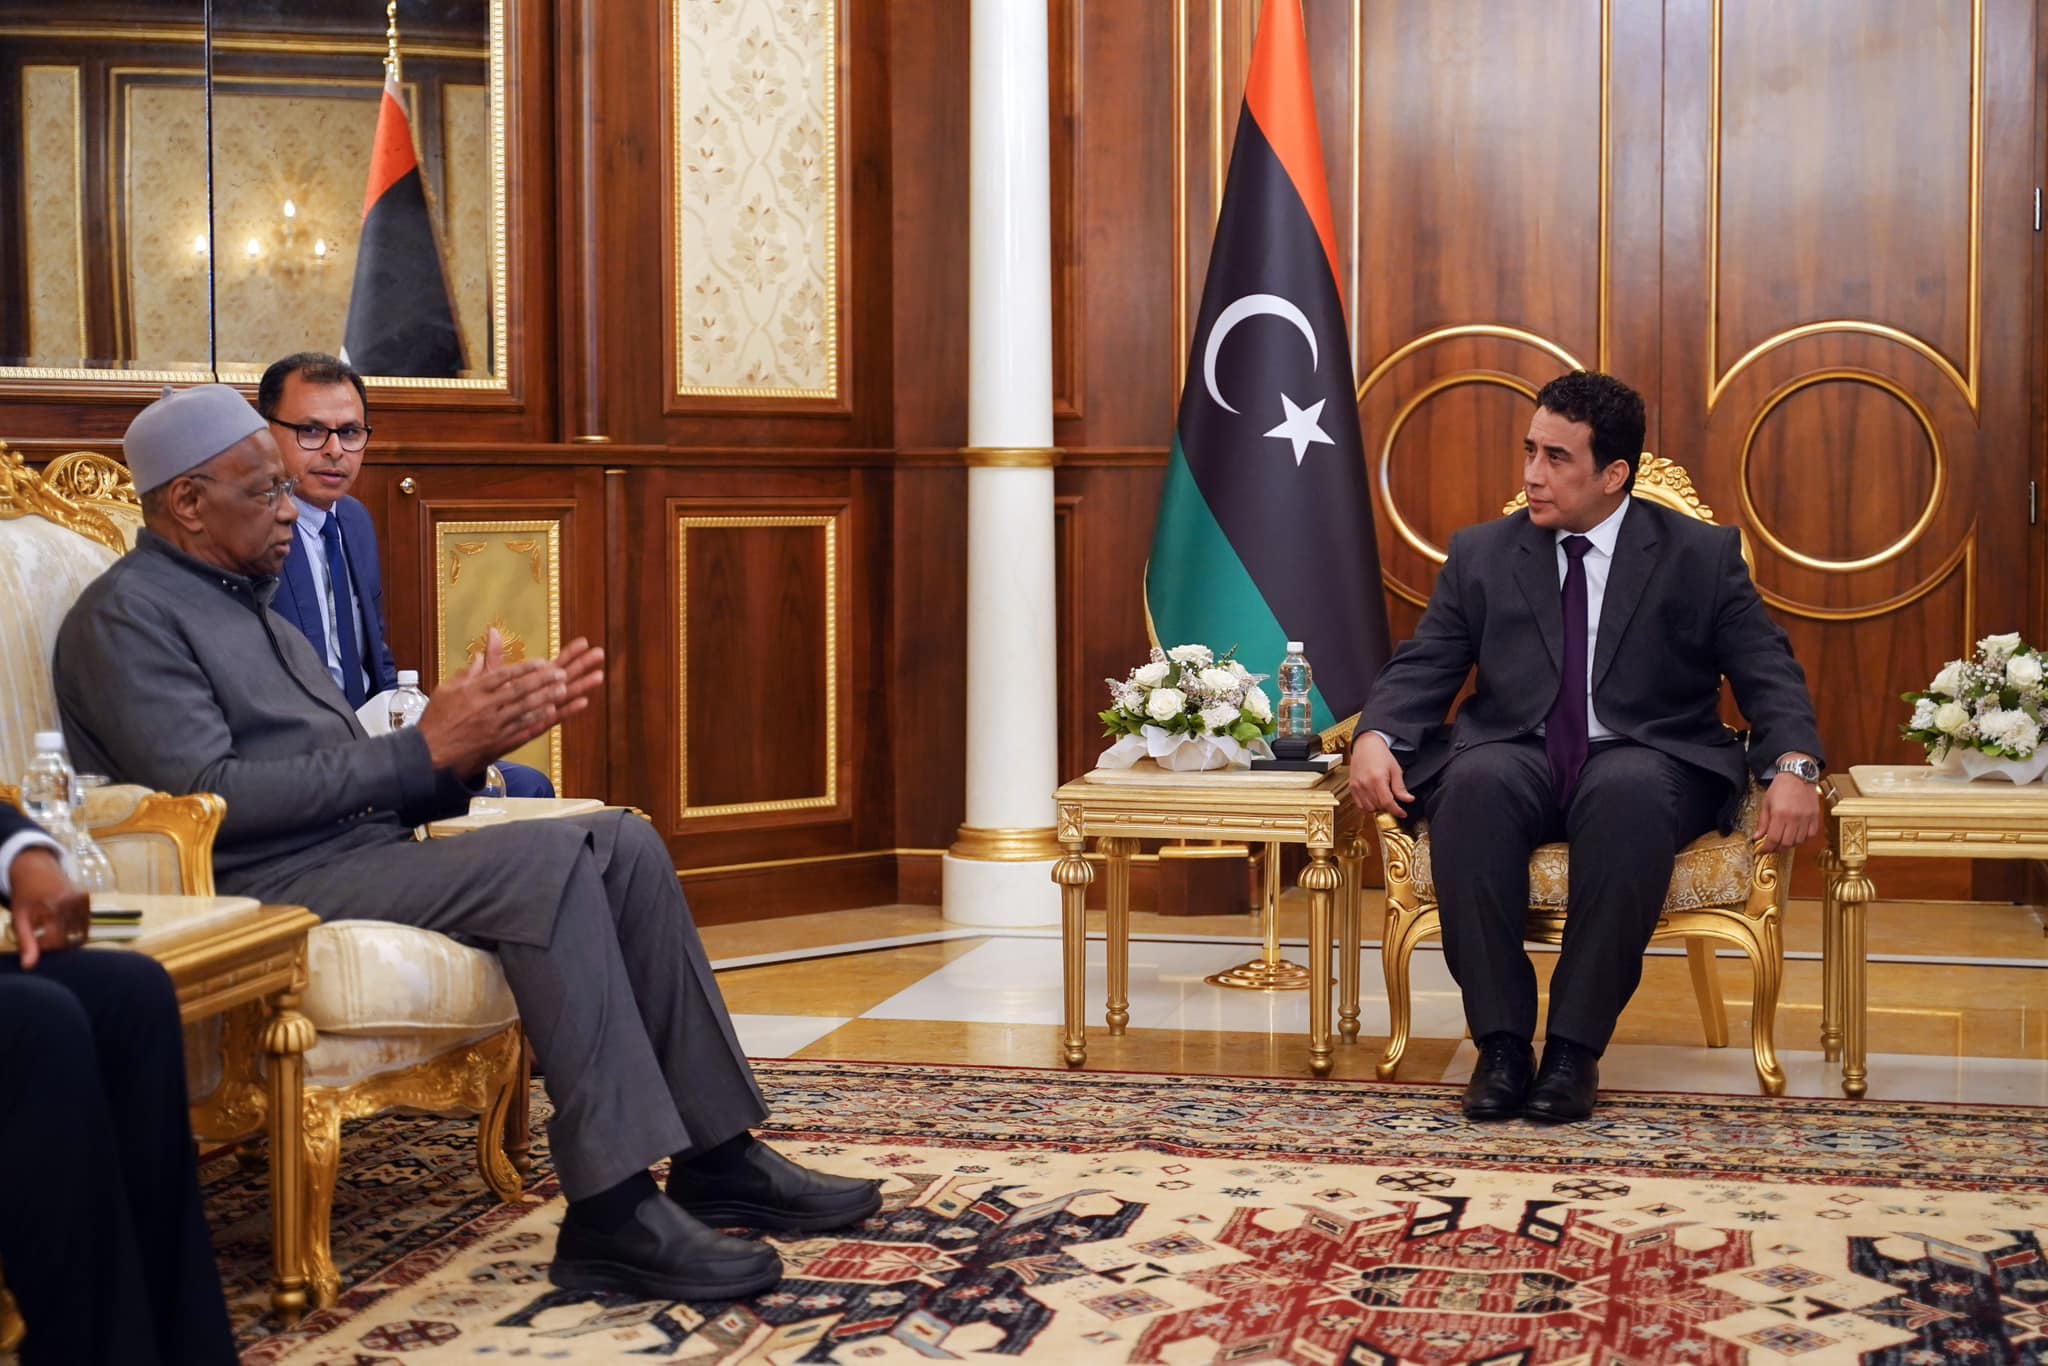 Batili praises the role of the Presidential Council in supporting international efforts in Libya.